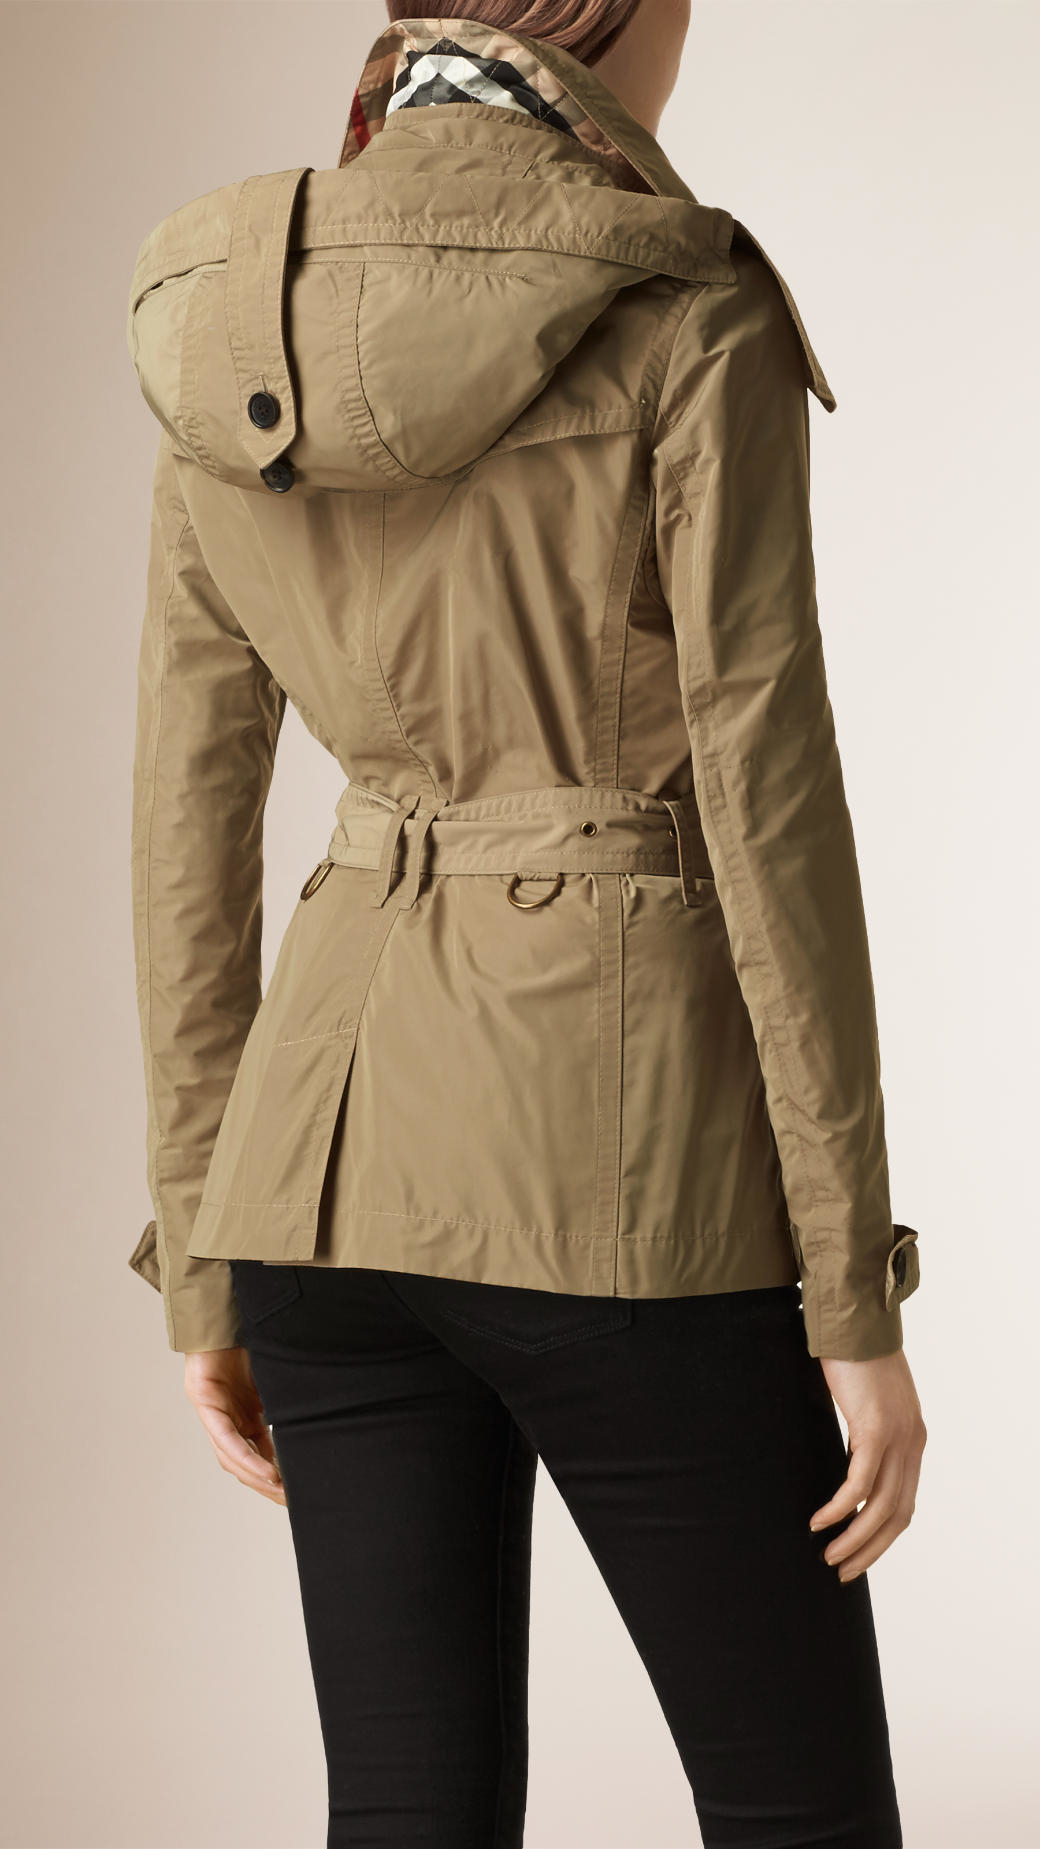 buy > burberry hooded trench coat > Up to 60% OFF > Free shipping